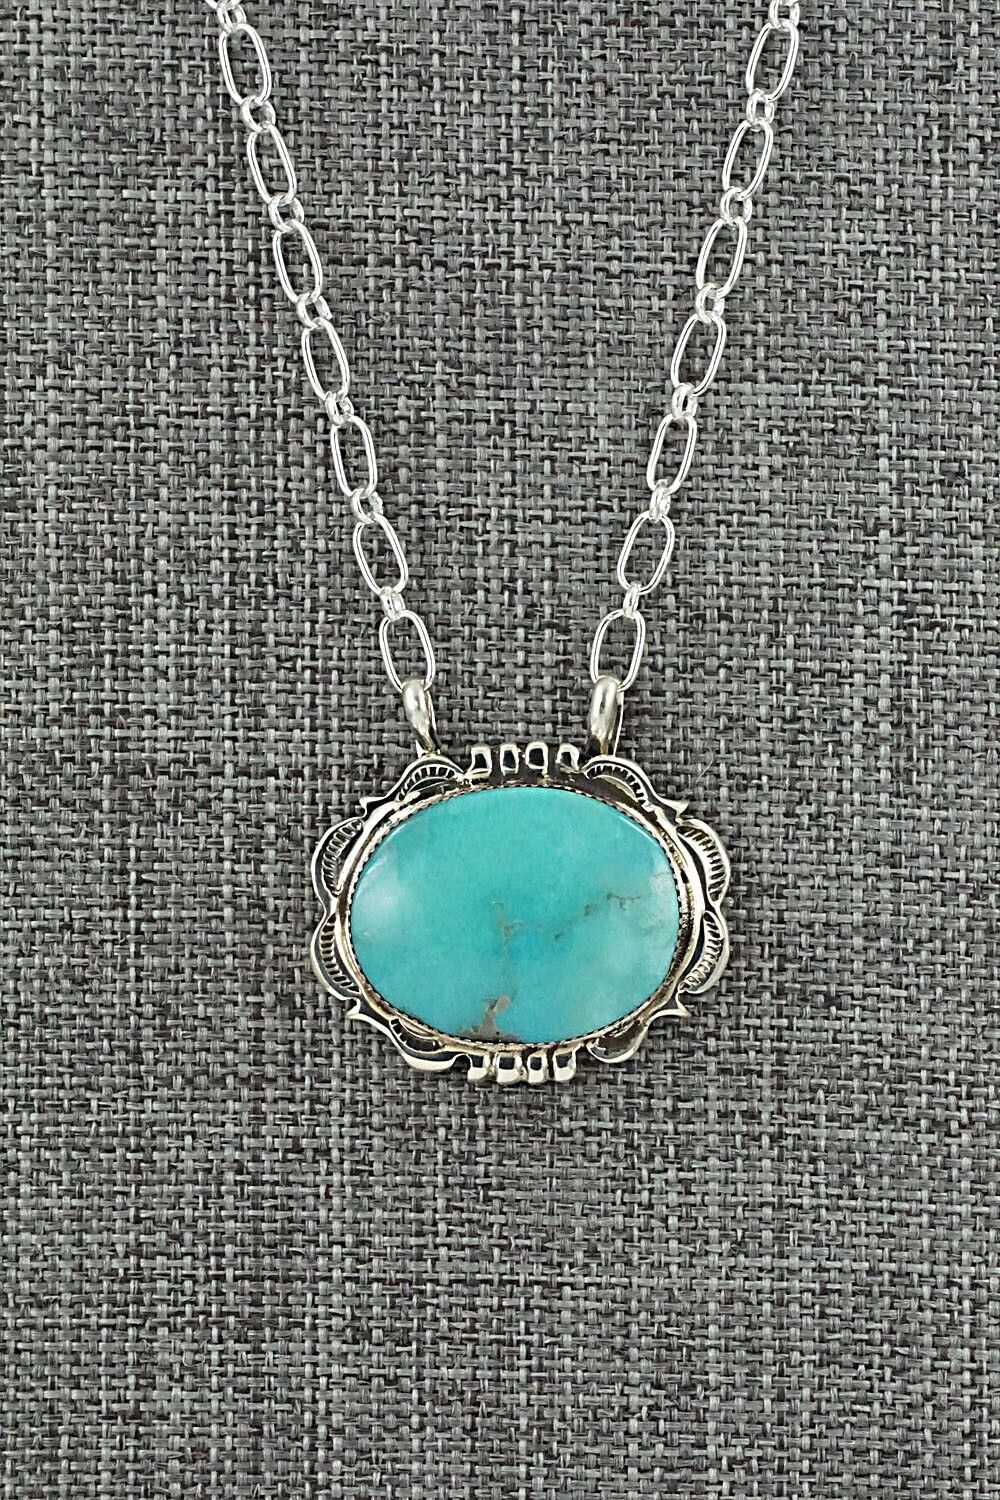 Turquoise & Sterling Silver Necklace - Leroy Silversmith